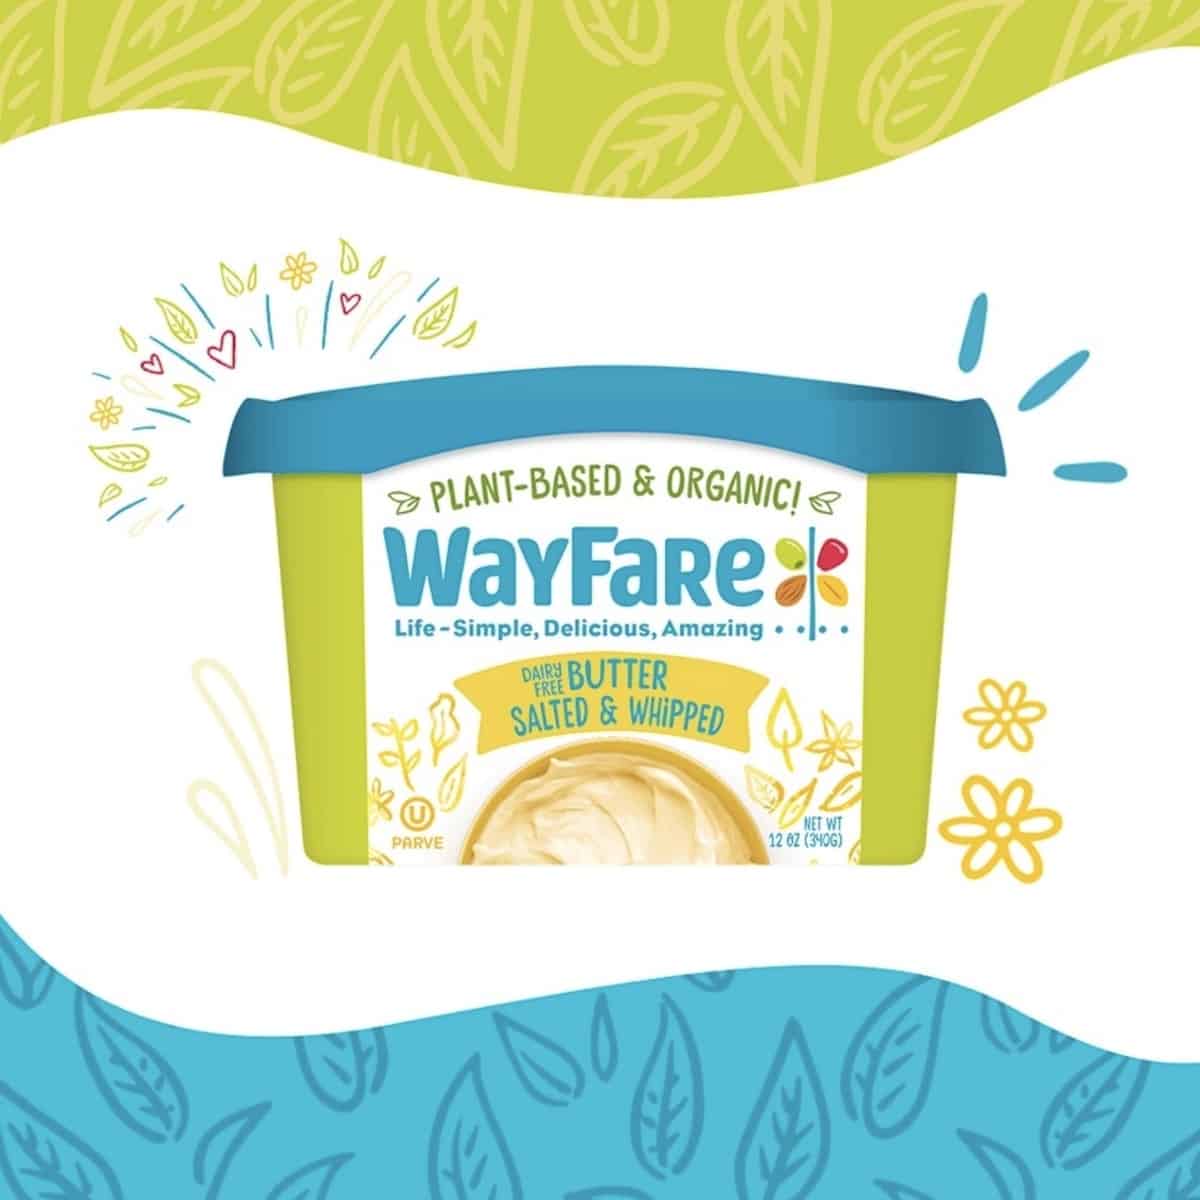 Container of Wayfare whipped plant-based butter in a green and blue container.